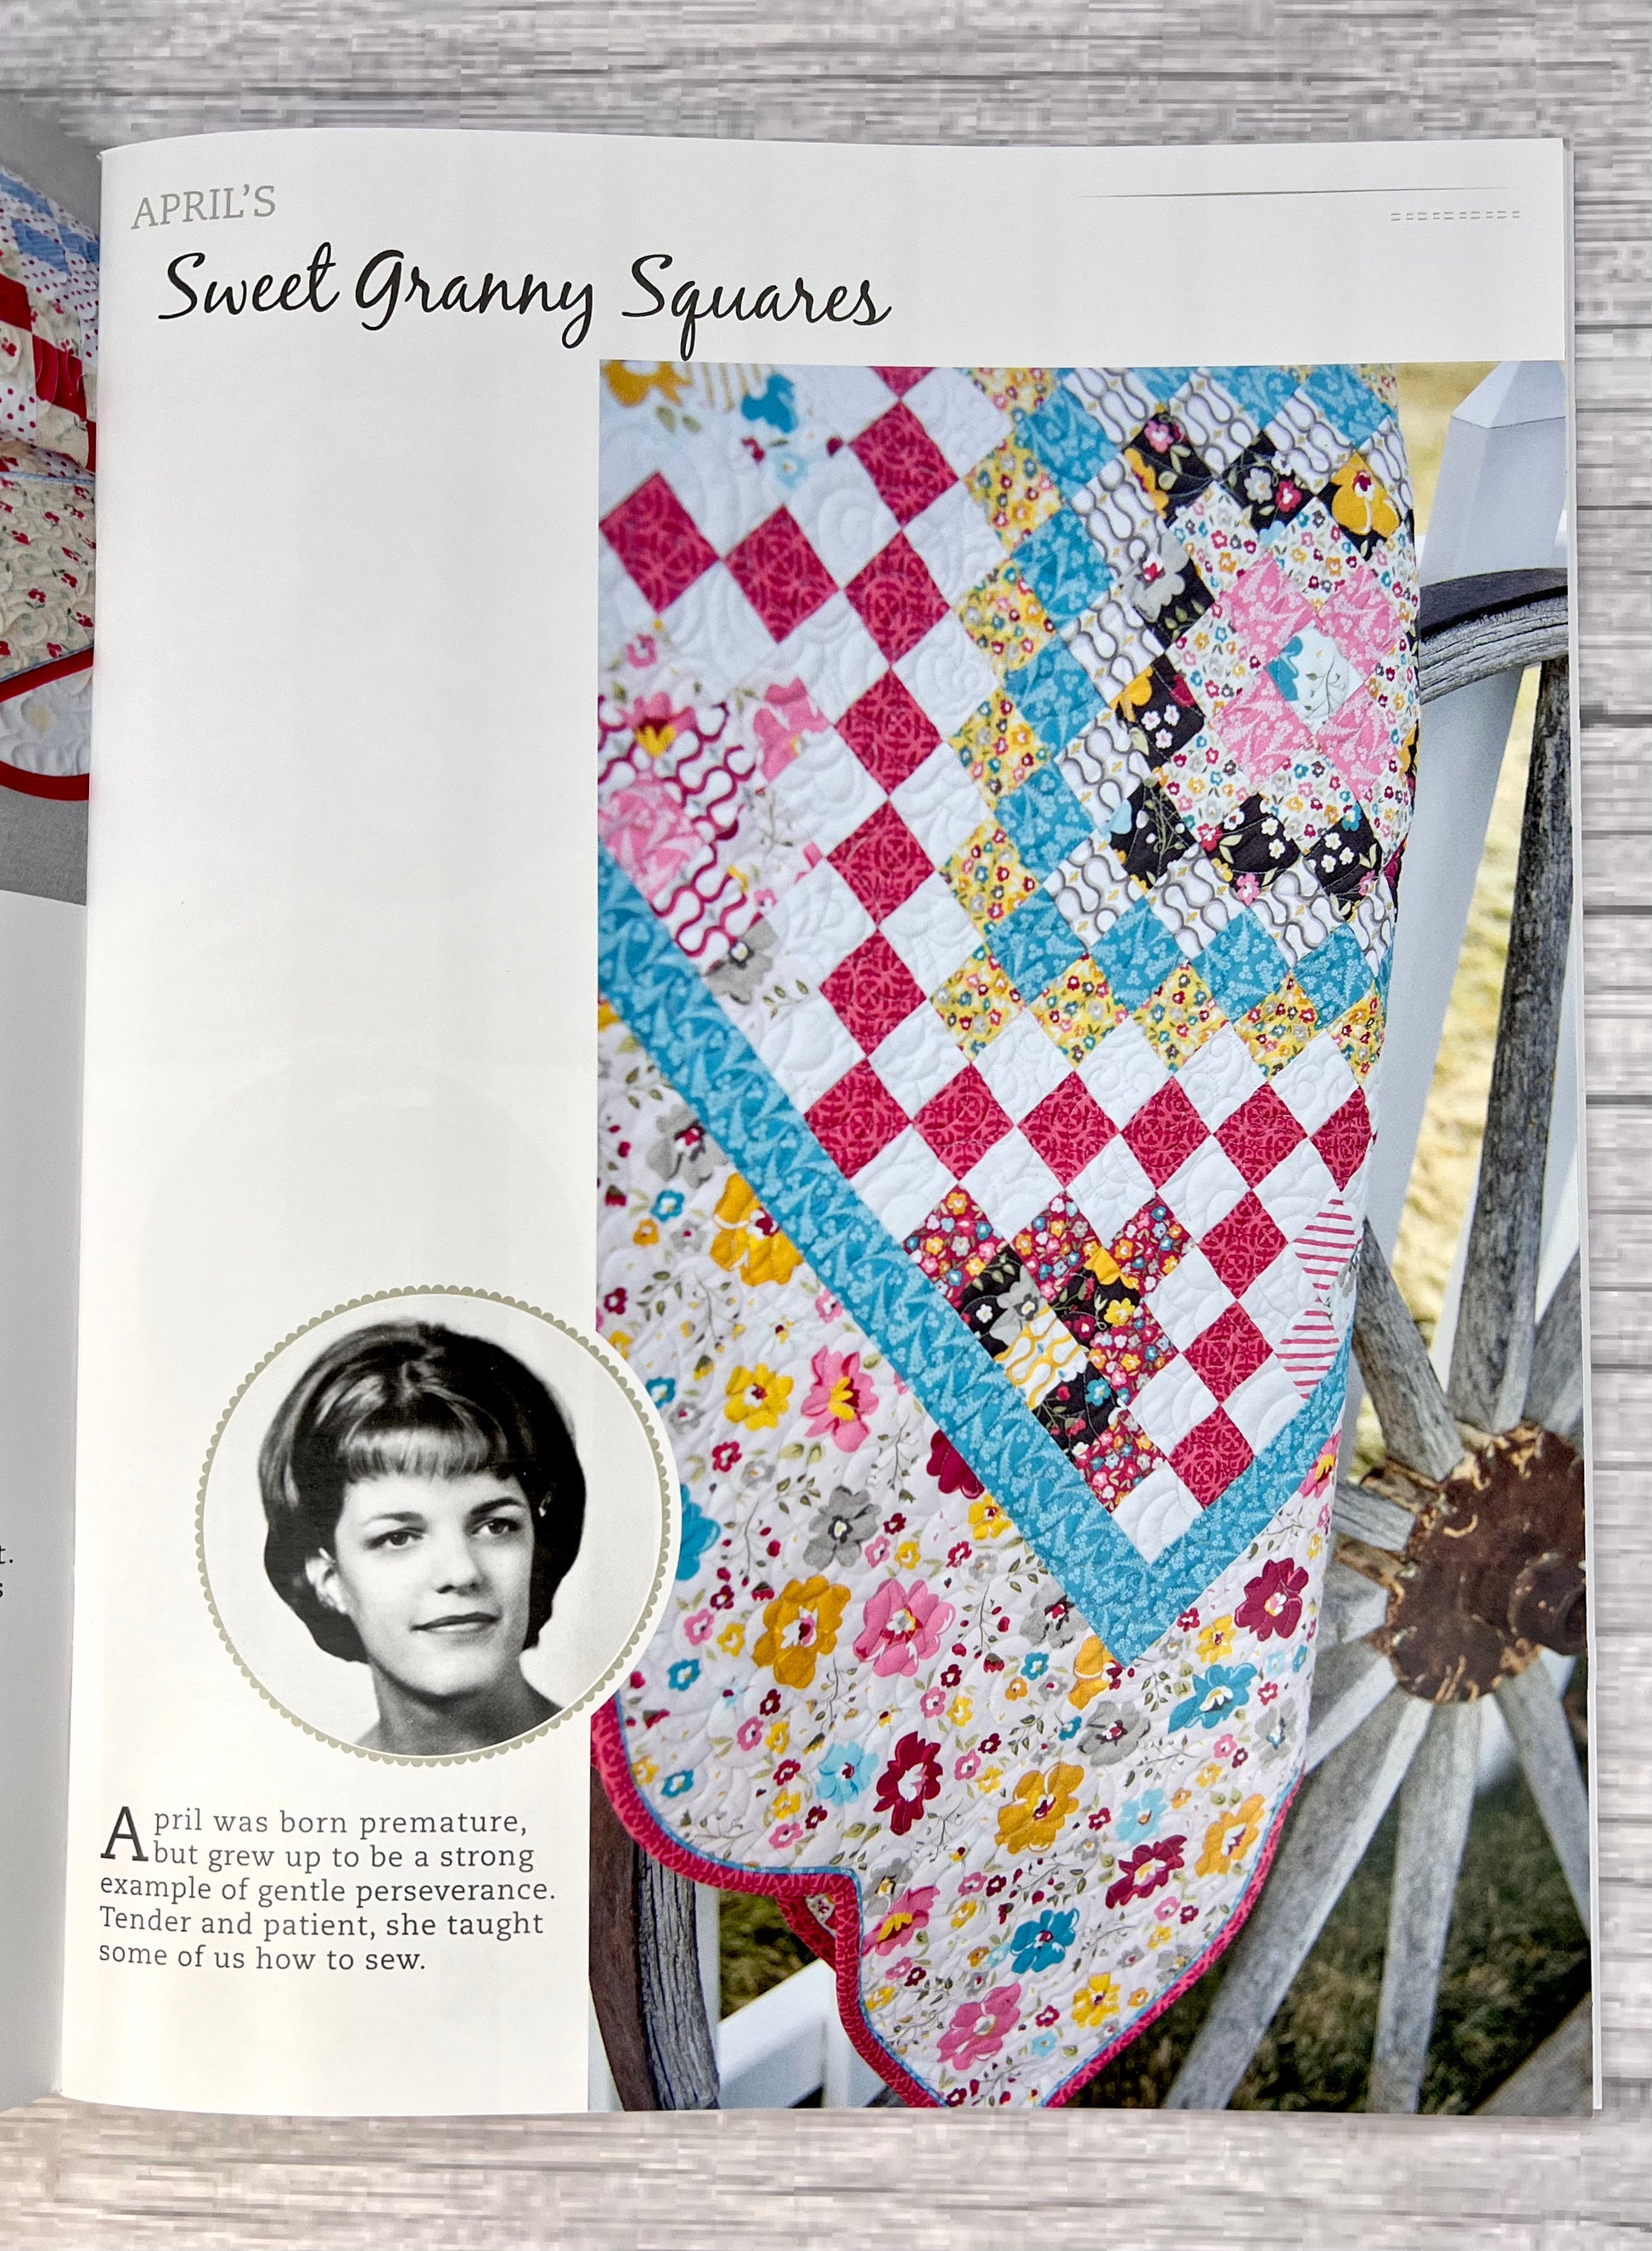 Ten Quilts for Ten Sisters Quilt Book from Carmen Geddes of Ten Sisters for Easy Piecing Grid System - Good Vibes Quilt Shop